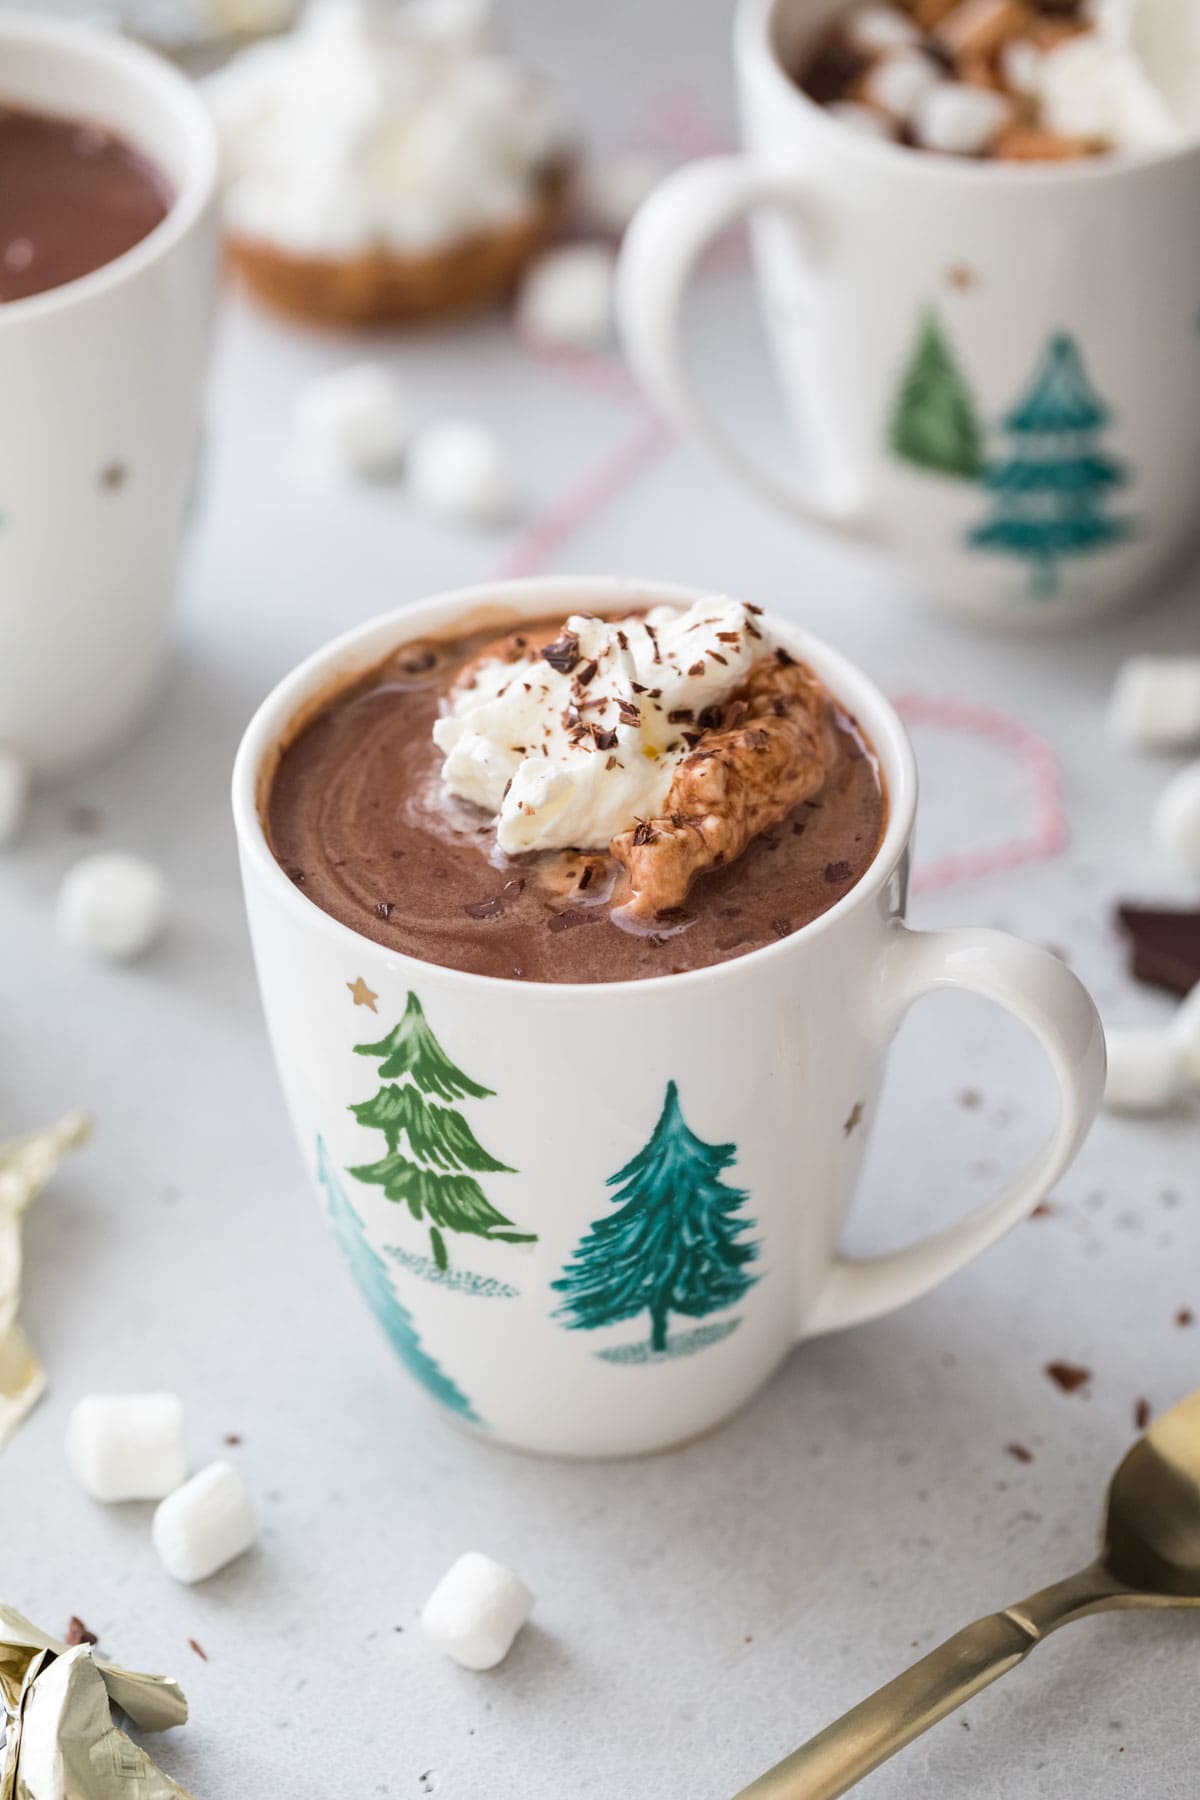 white mug of hot chocolate topped with whipped cream and chocolate shavings